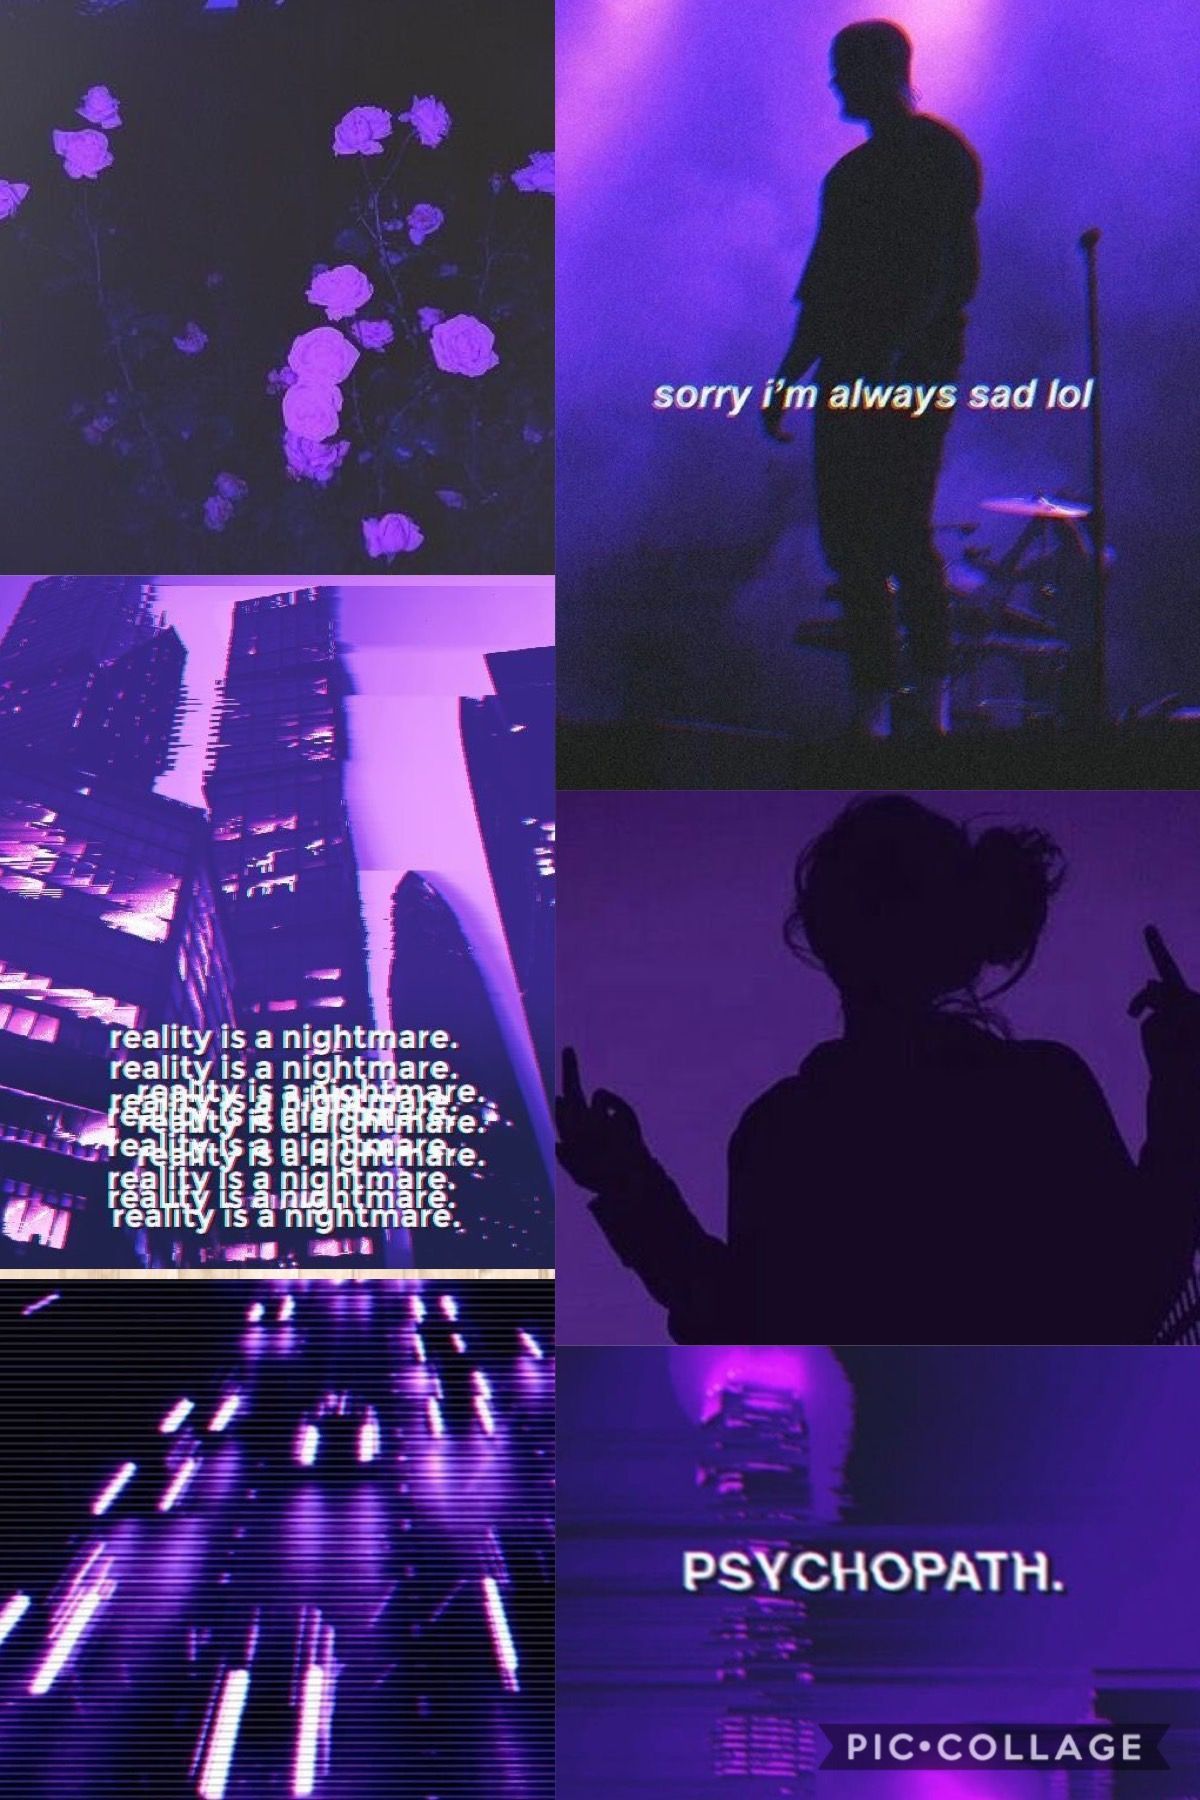 Purple aesthetic wallpaper. Purple aesthetic, Quotes about photography, Blue aesthetic